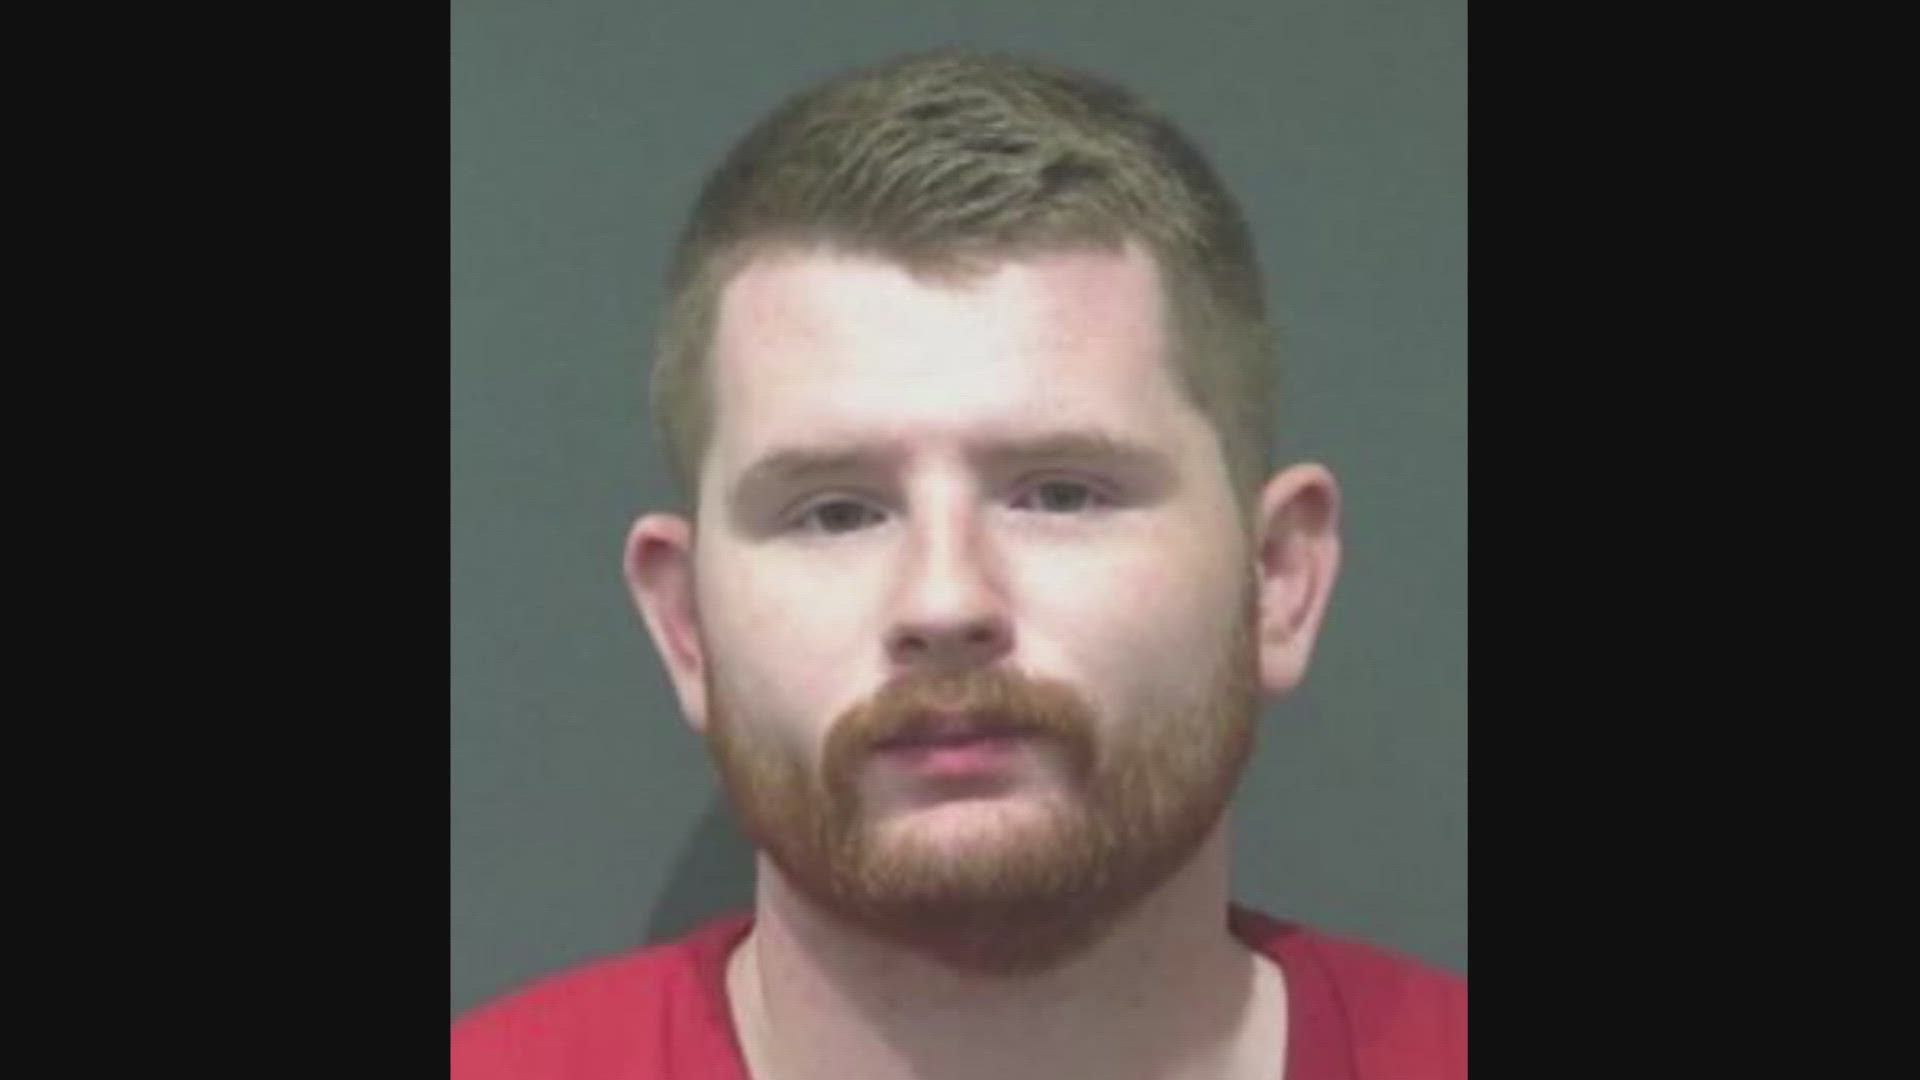 The deputy, identified as Austin Case, allegedly threatened to arrest one woman unless she came over to his home.